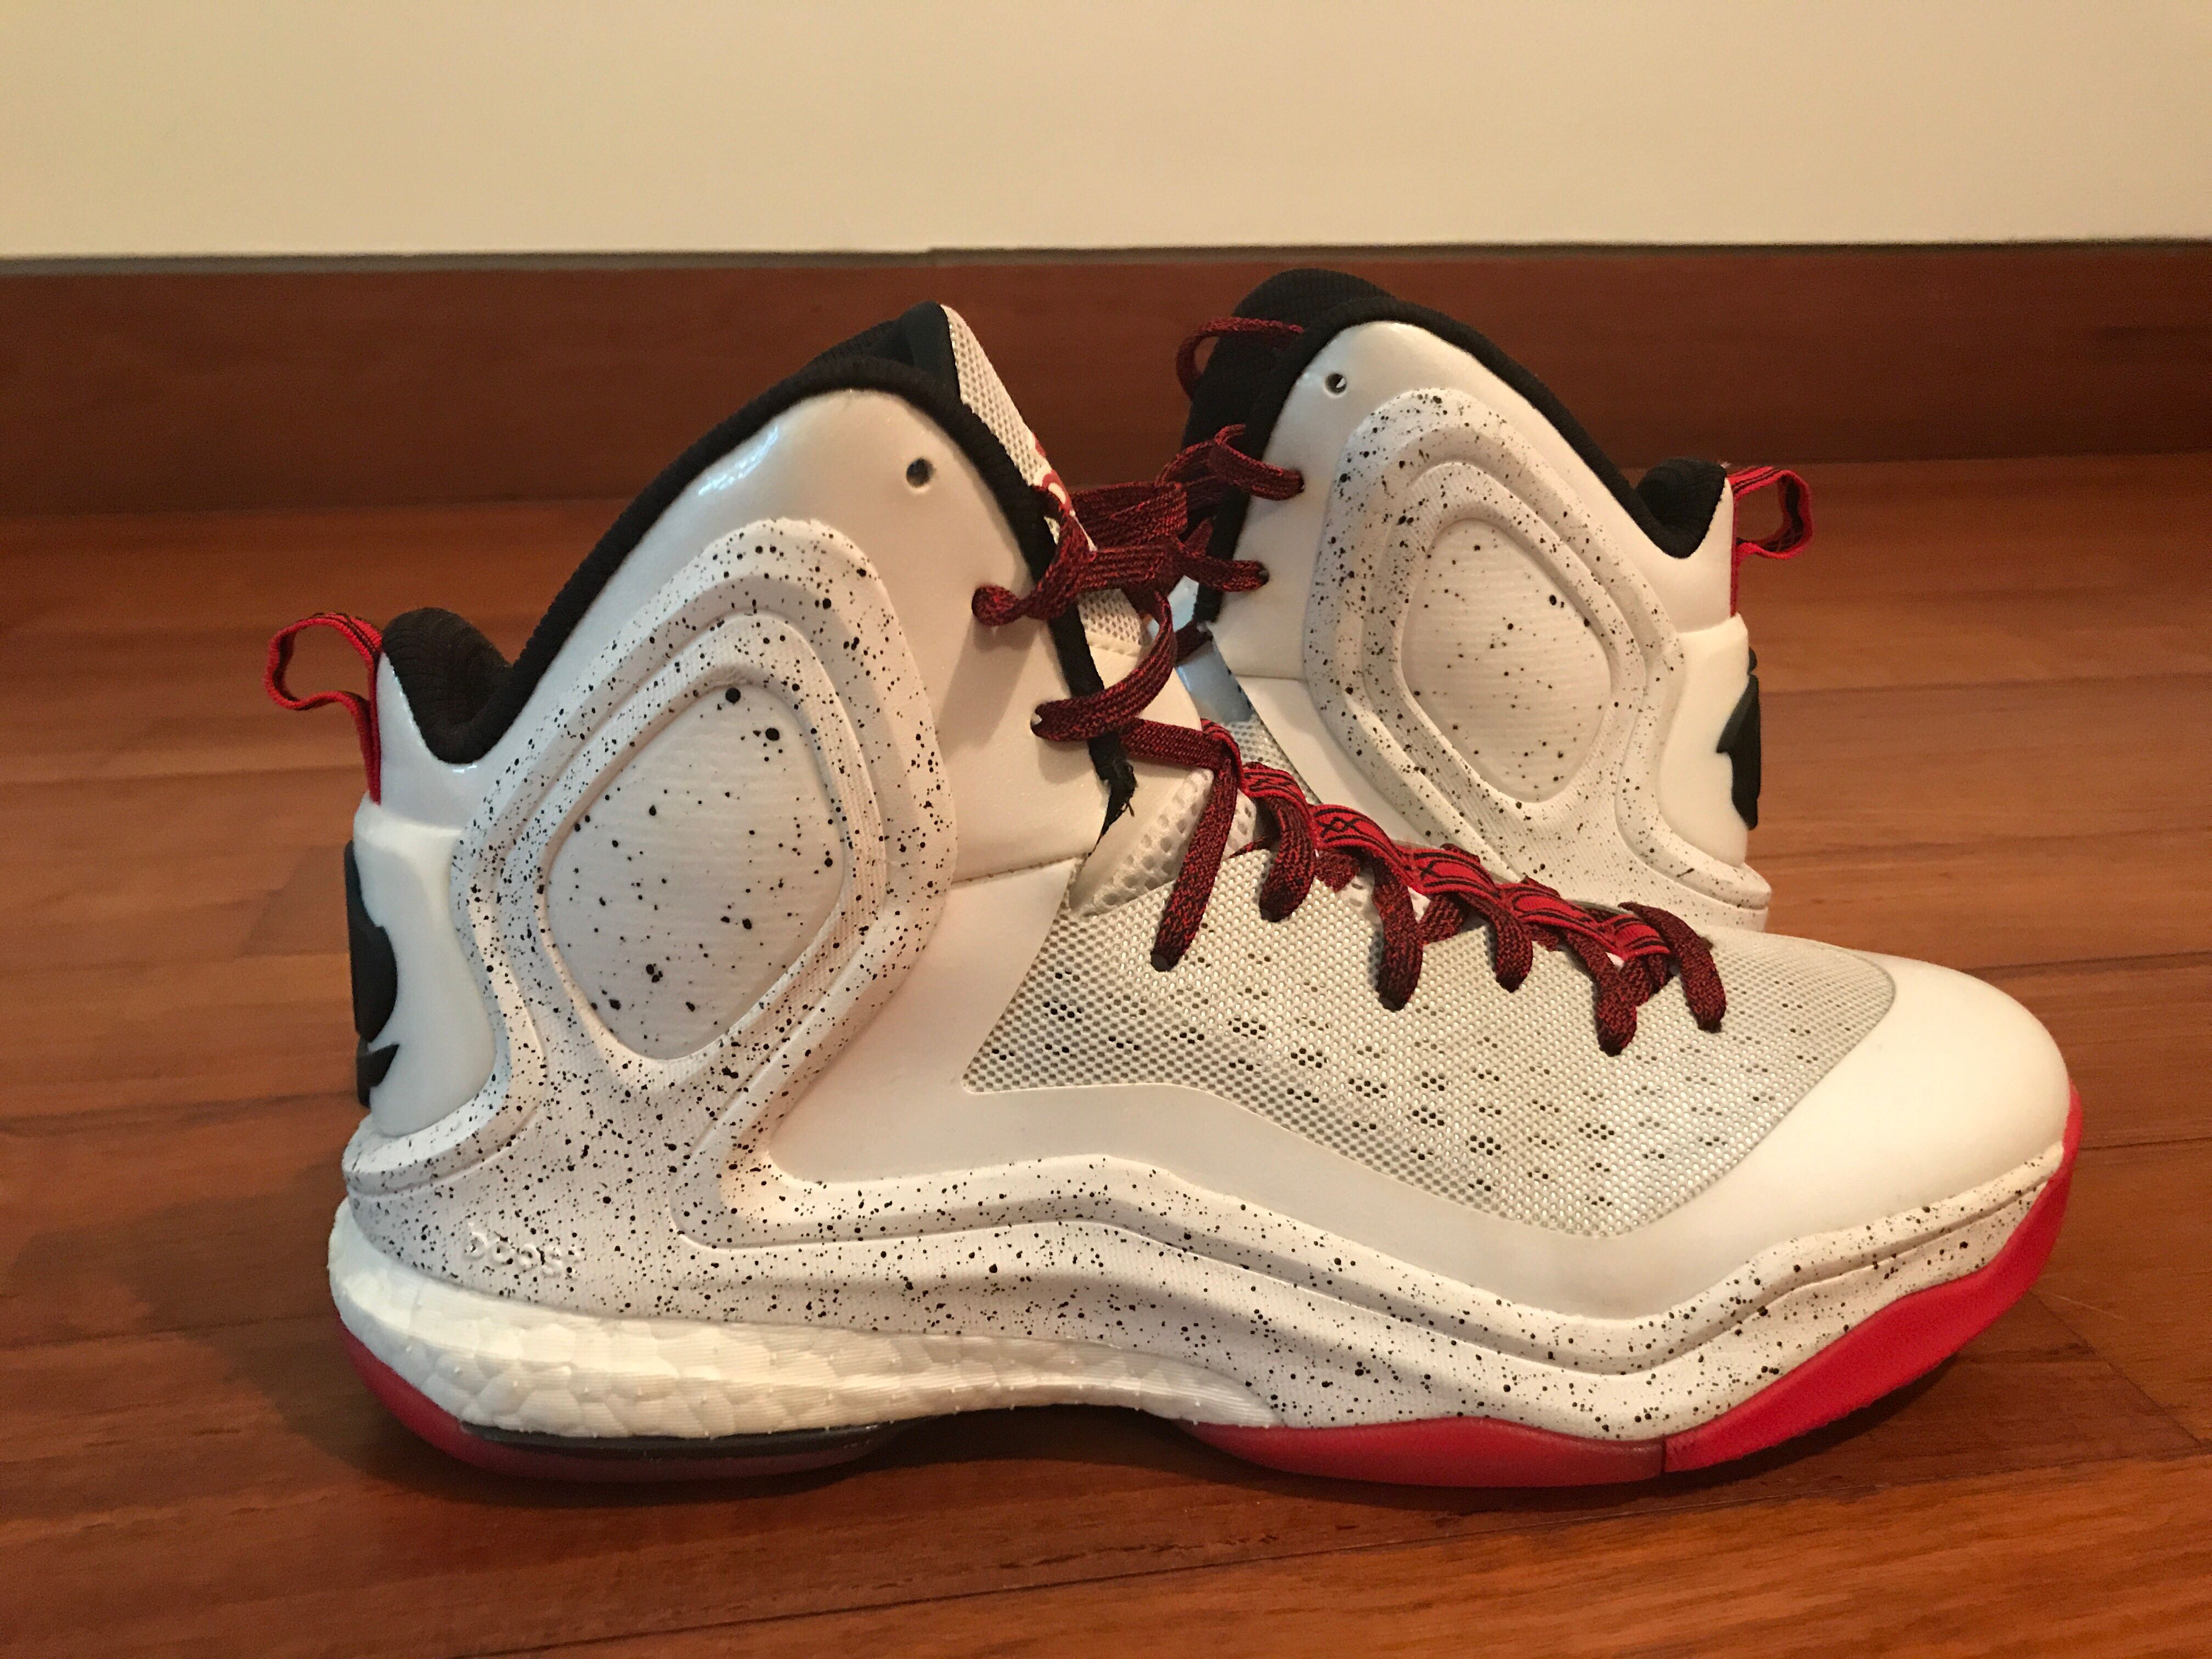 d rose 5 red and white